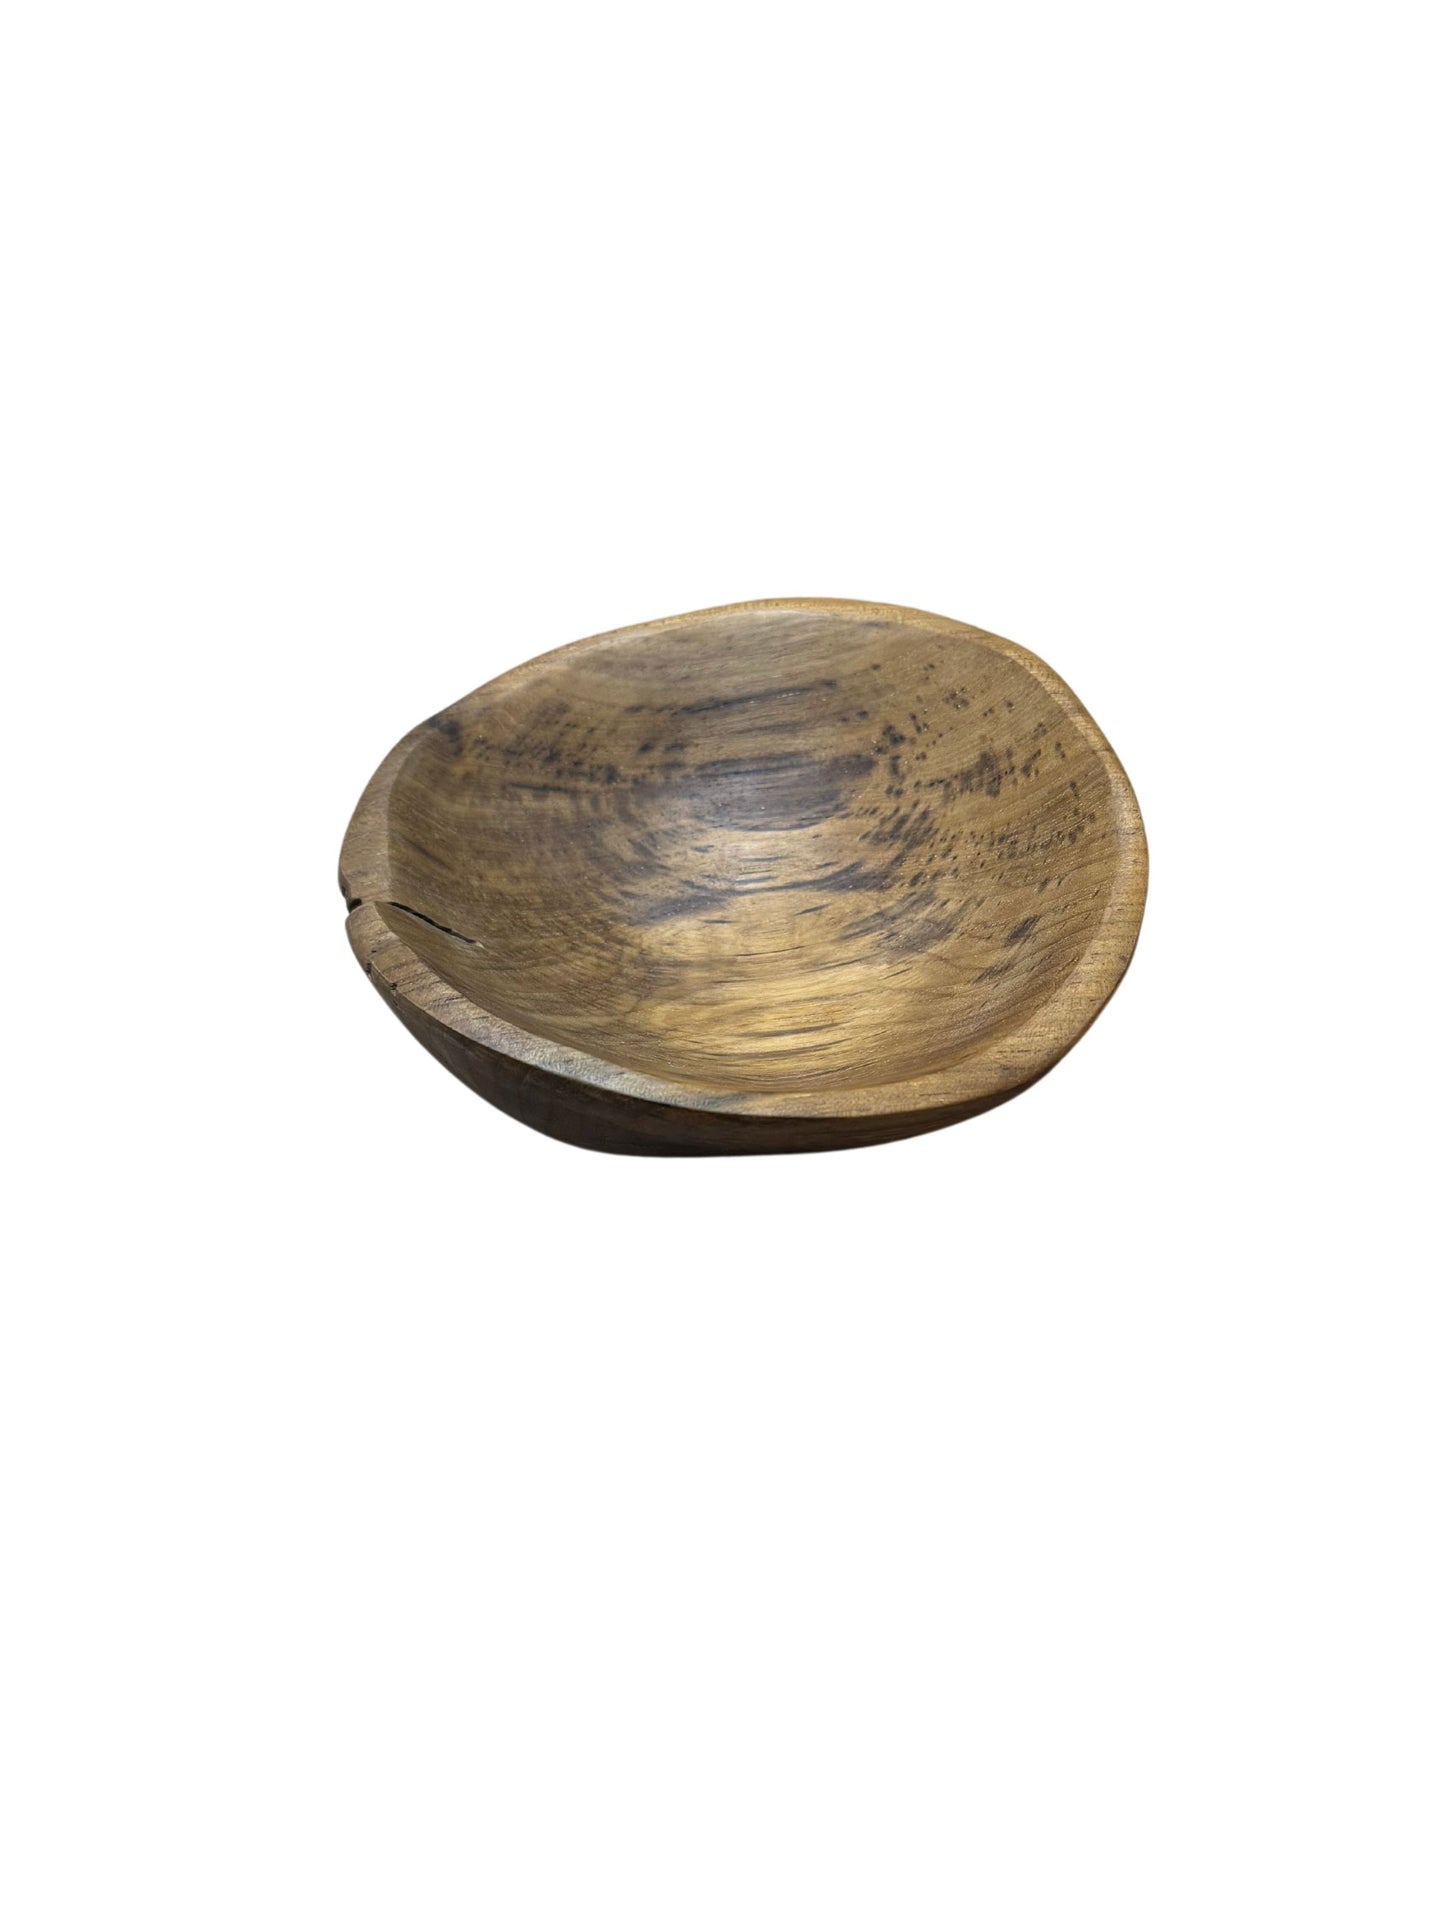 Eclectic Home Accent Teak Small Bowl 1301 Wooden Decor Furniture